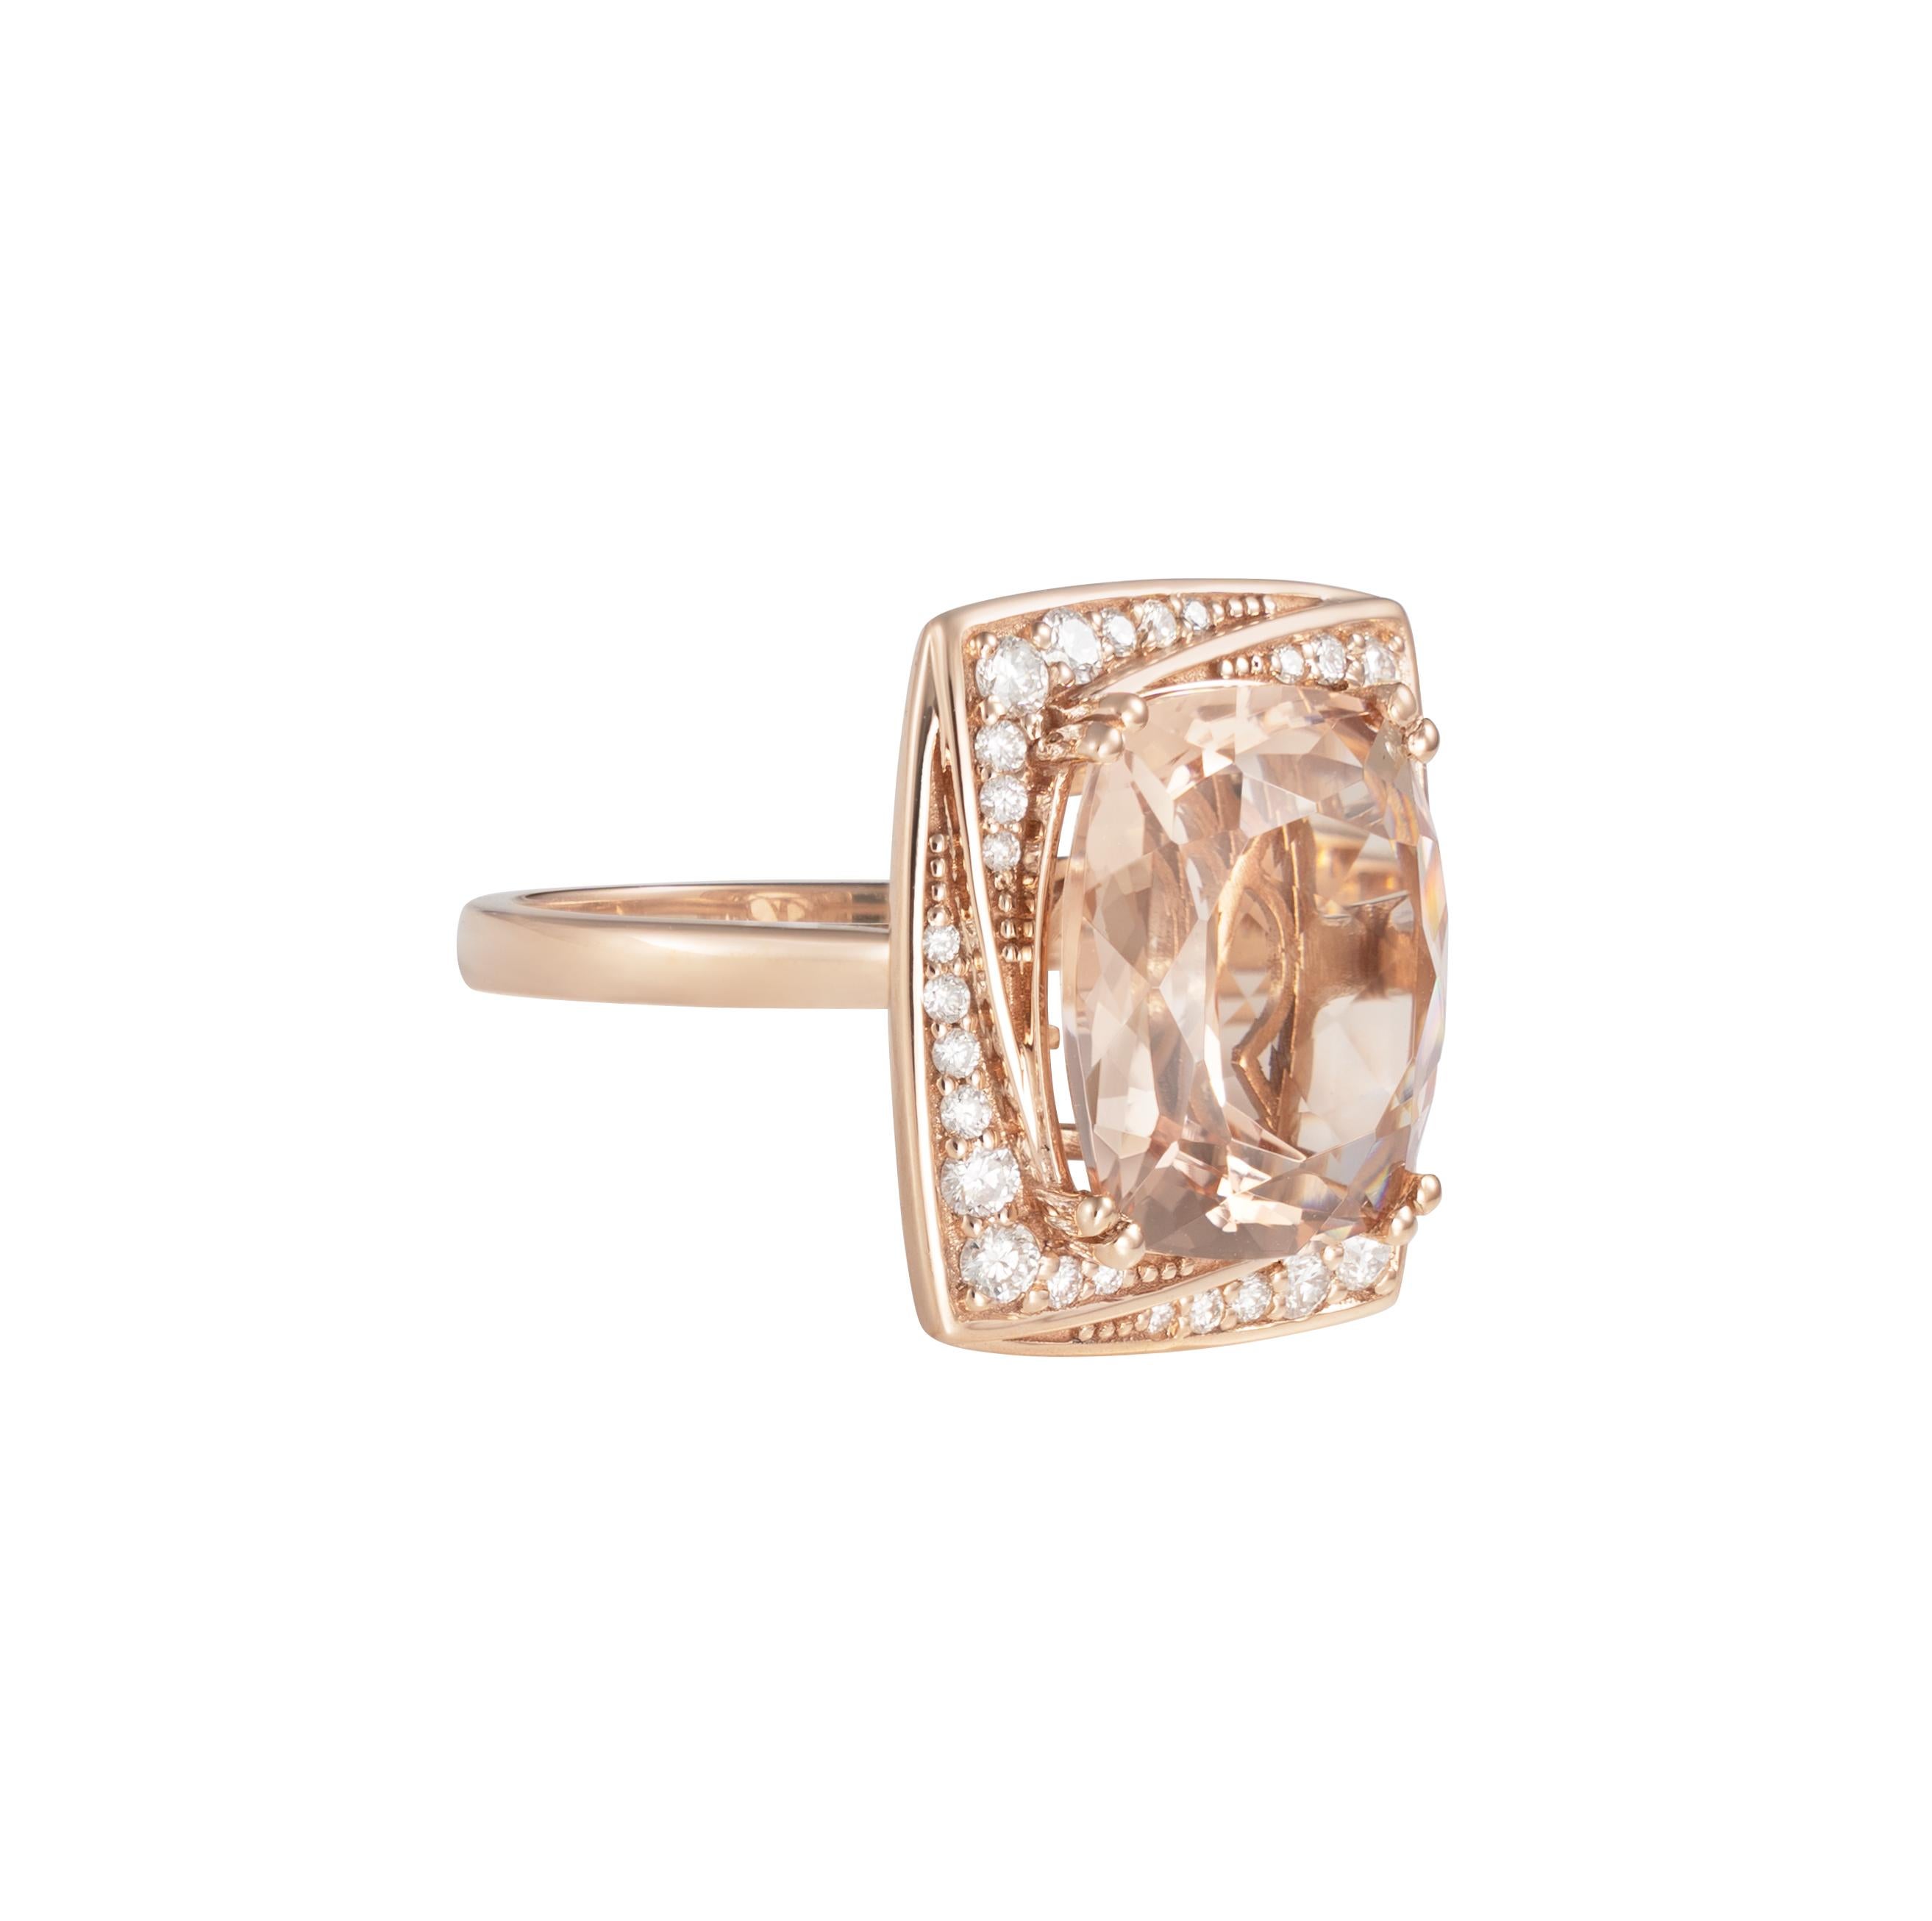 Contemporary 7.5 Carat Morganite and Diamond Ring in 18 Karat Rose Gold For Sale